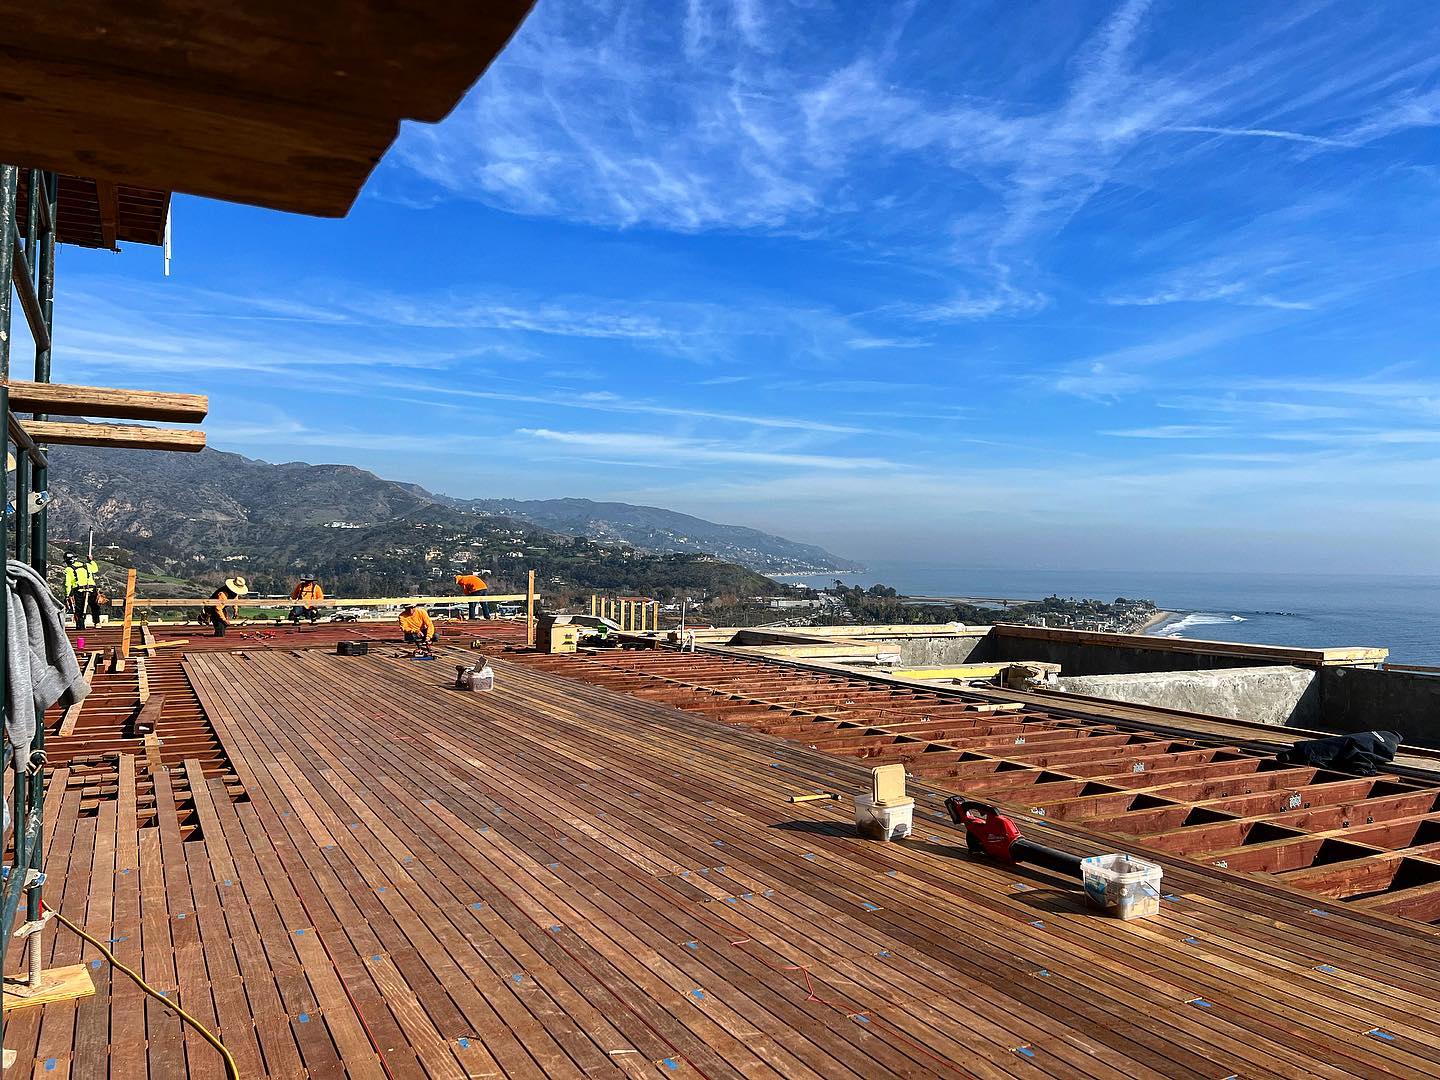 This is probably the single best location in all of Malibu, view of the world. As I e done prior I will let the comments be the description. I’m very humbled and fortunate to have a team of highly skilled craftsman under me. My guys just simply get it done. #scottgillendesign #thecase #private